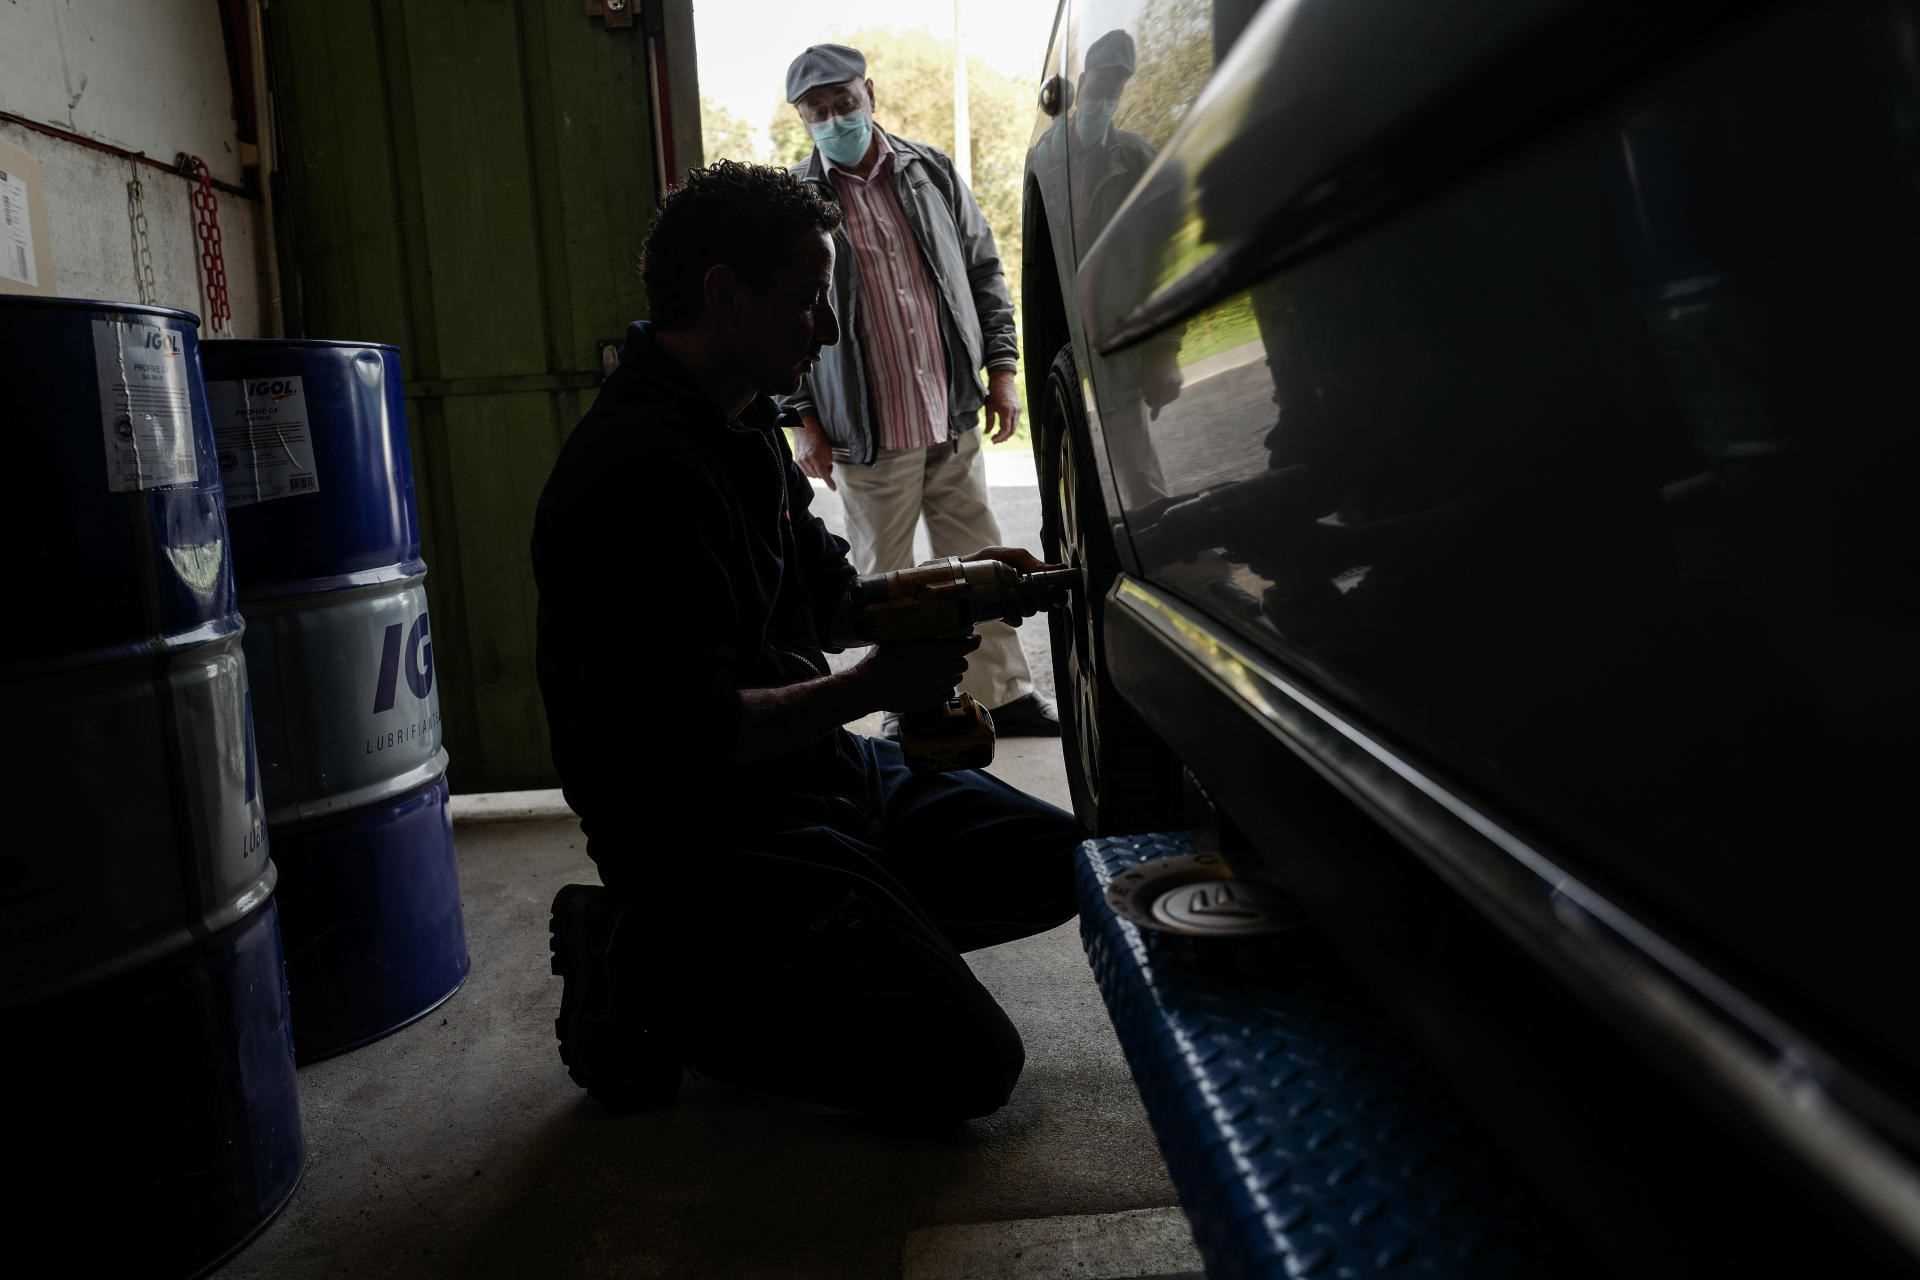 Jérôme Boyer, one of the employees of the Fauvin garage, repairs a customer's wheel, in Saint-Germain-des-Prés (Loiret), September 28, 2021.